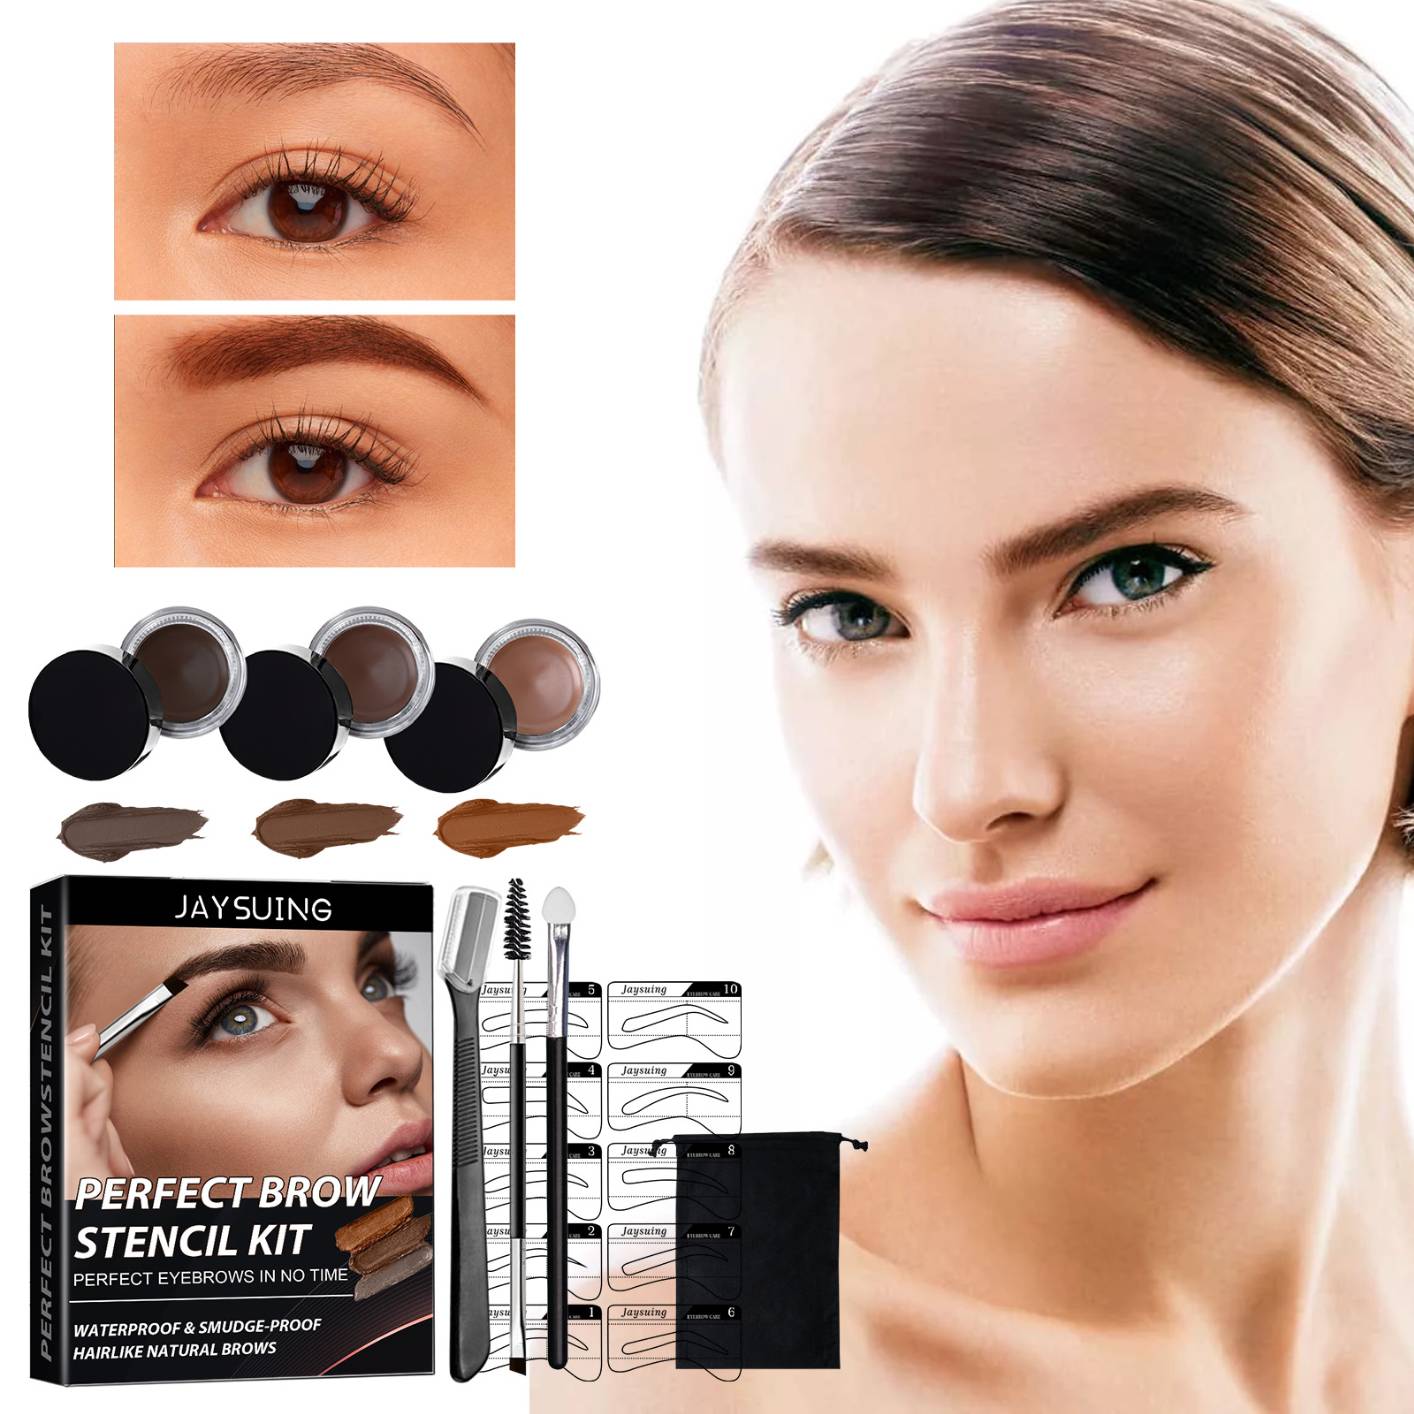 18Pcs Eyebrow Stamp and Eyebrow Stencil Kit, Professional Eyebrow Makeup Kit, Long Lasting Waterproof Smudge Proof Eyebrow Styling Pomade for Natural Brows